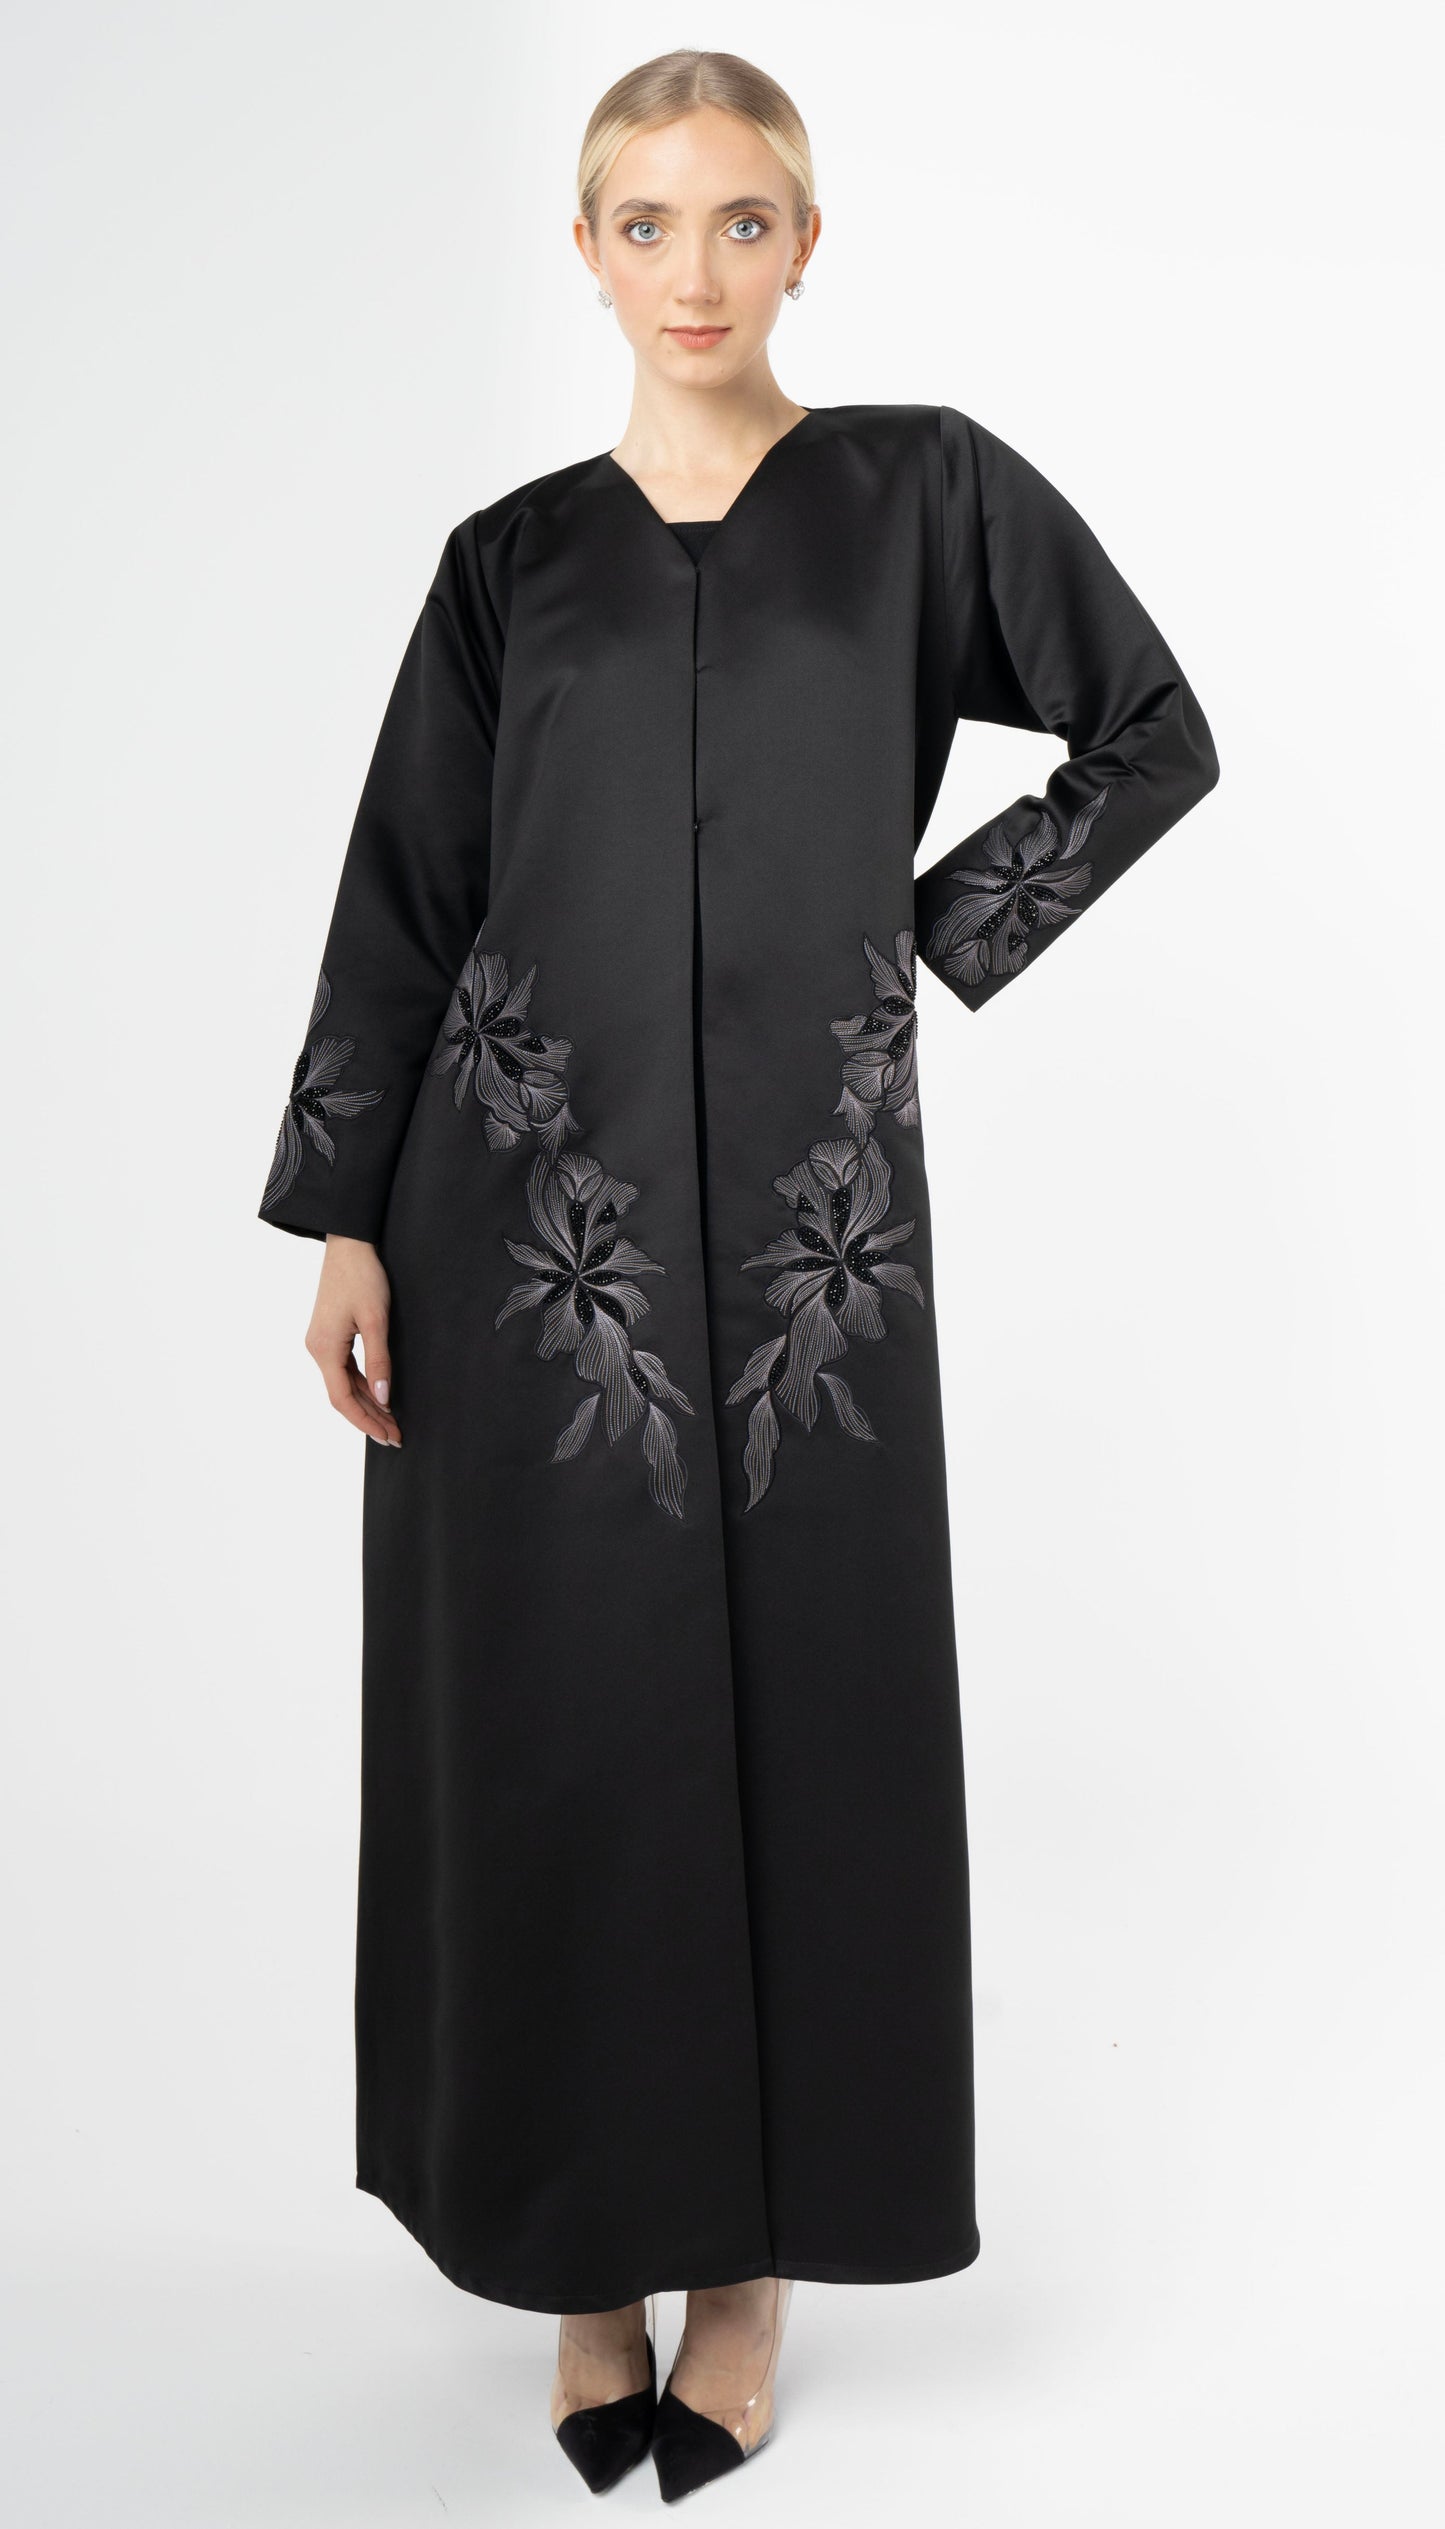 Black Abaya With Elegant Embroidery On Front And Sleeves